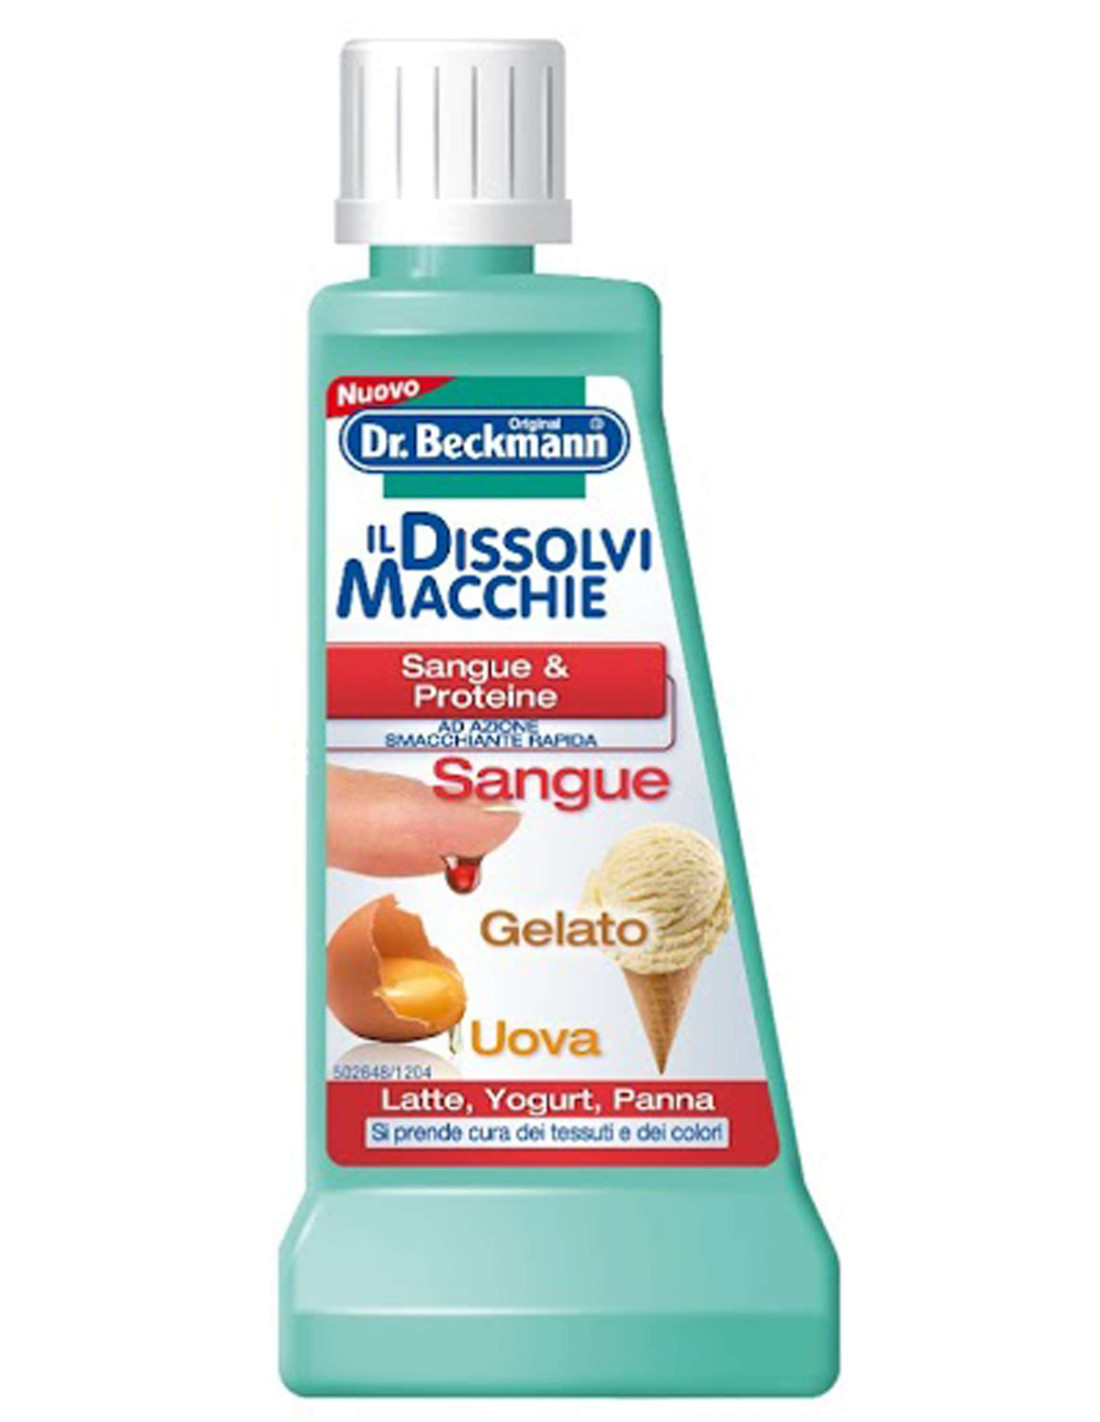 Dr. Beckmann Special remover against blood stains ice cream...